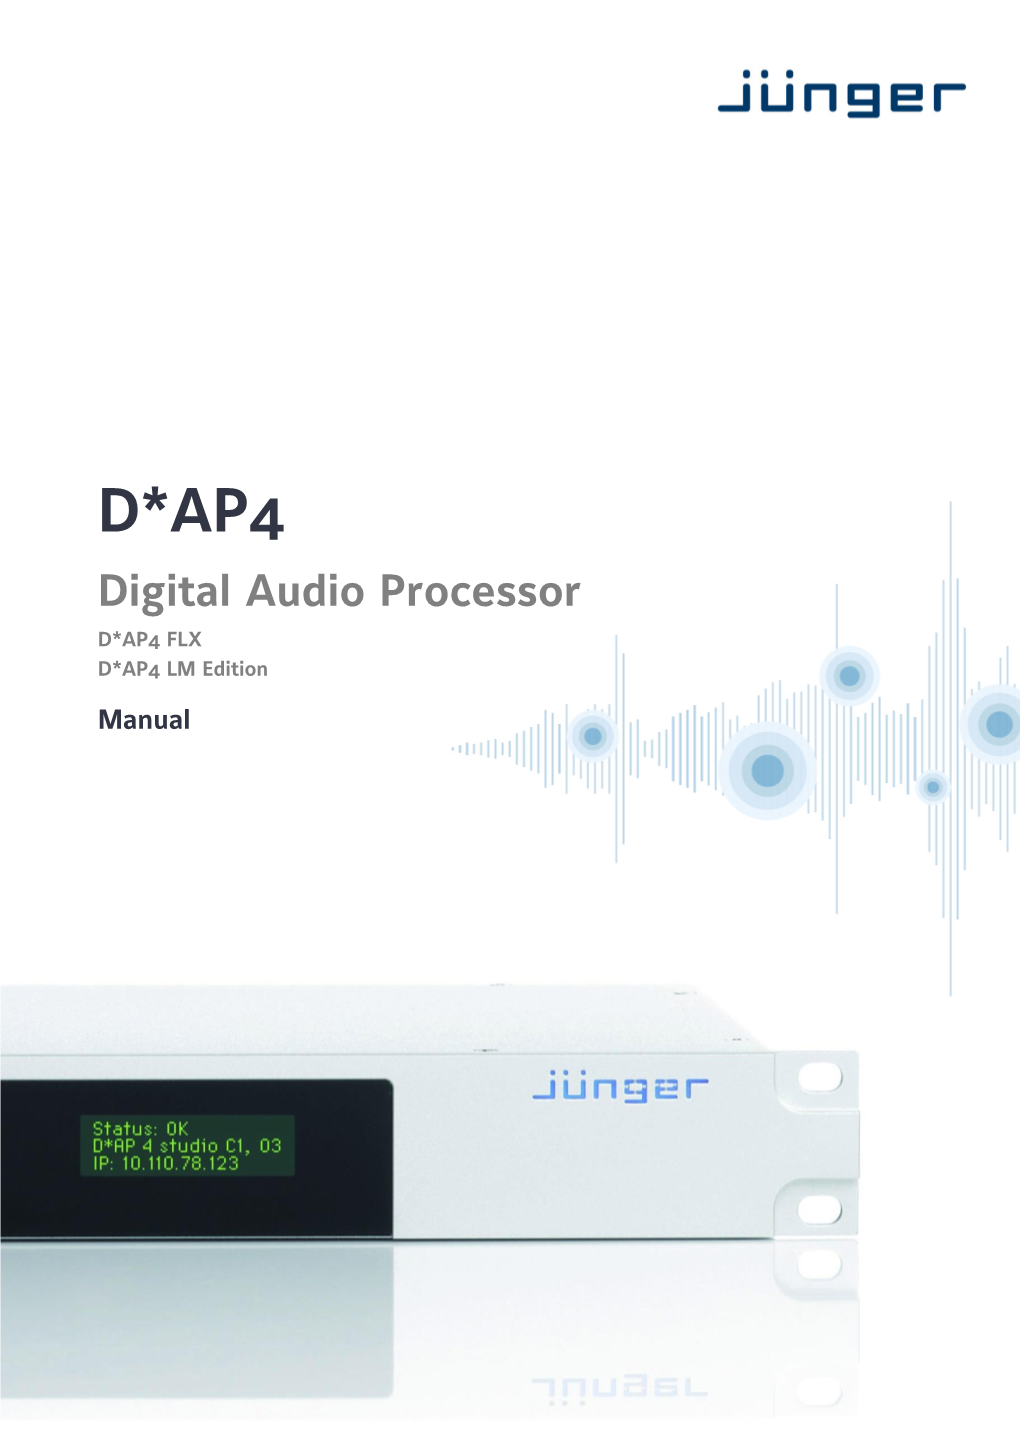 D*AP4 FLX and LM EDITION (MANUAL)